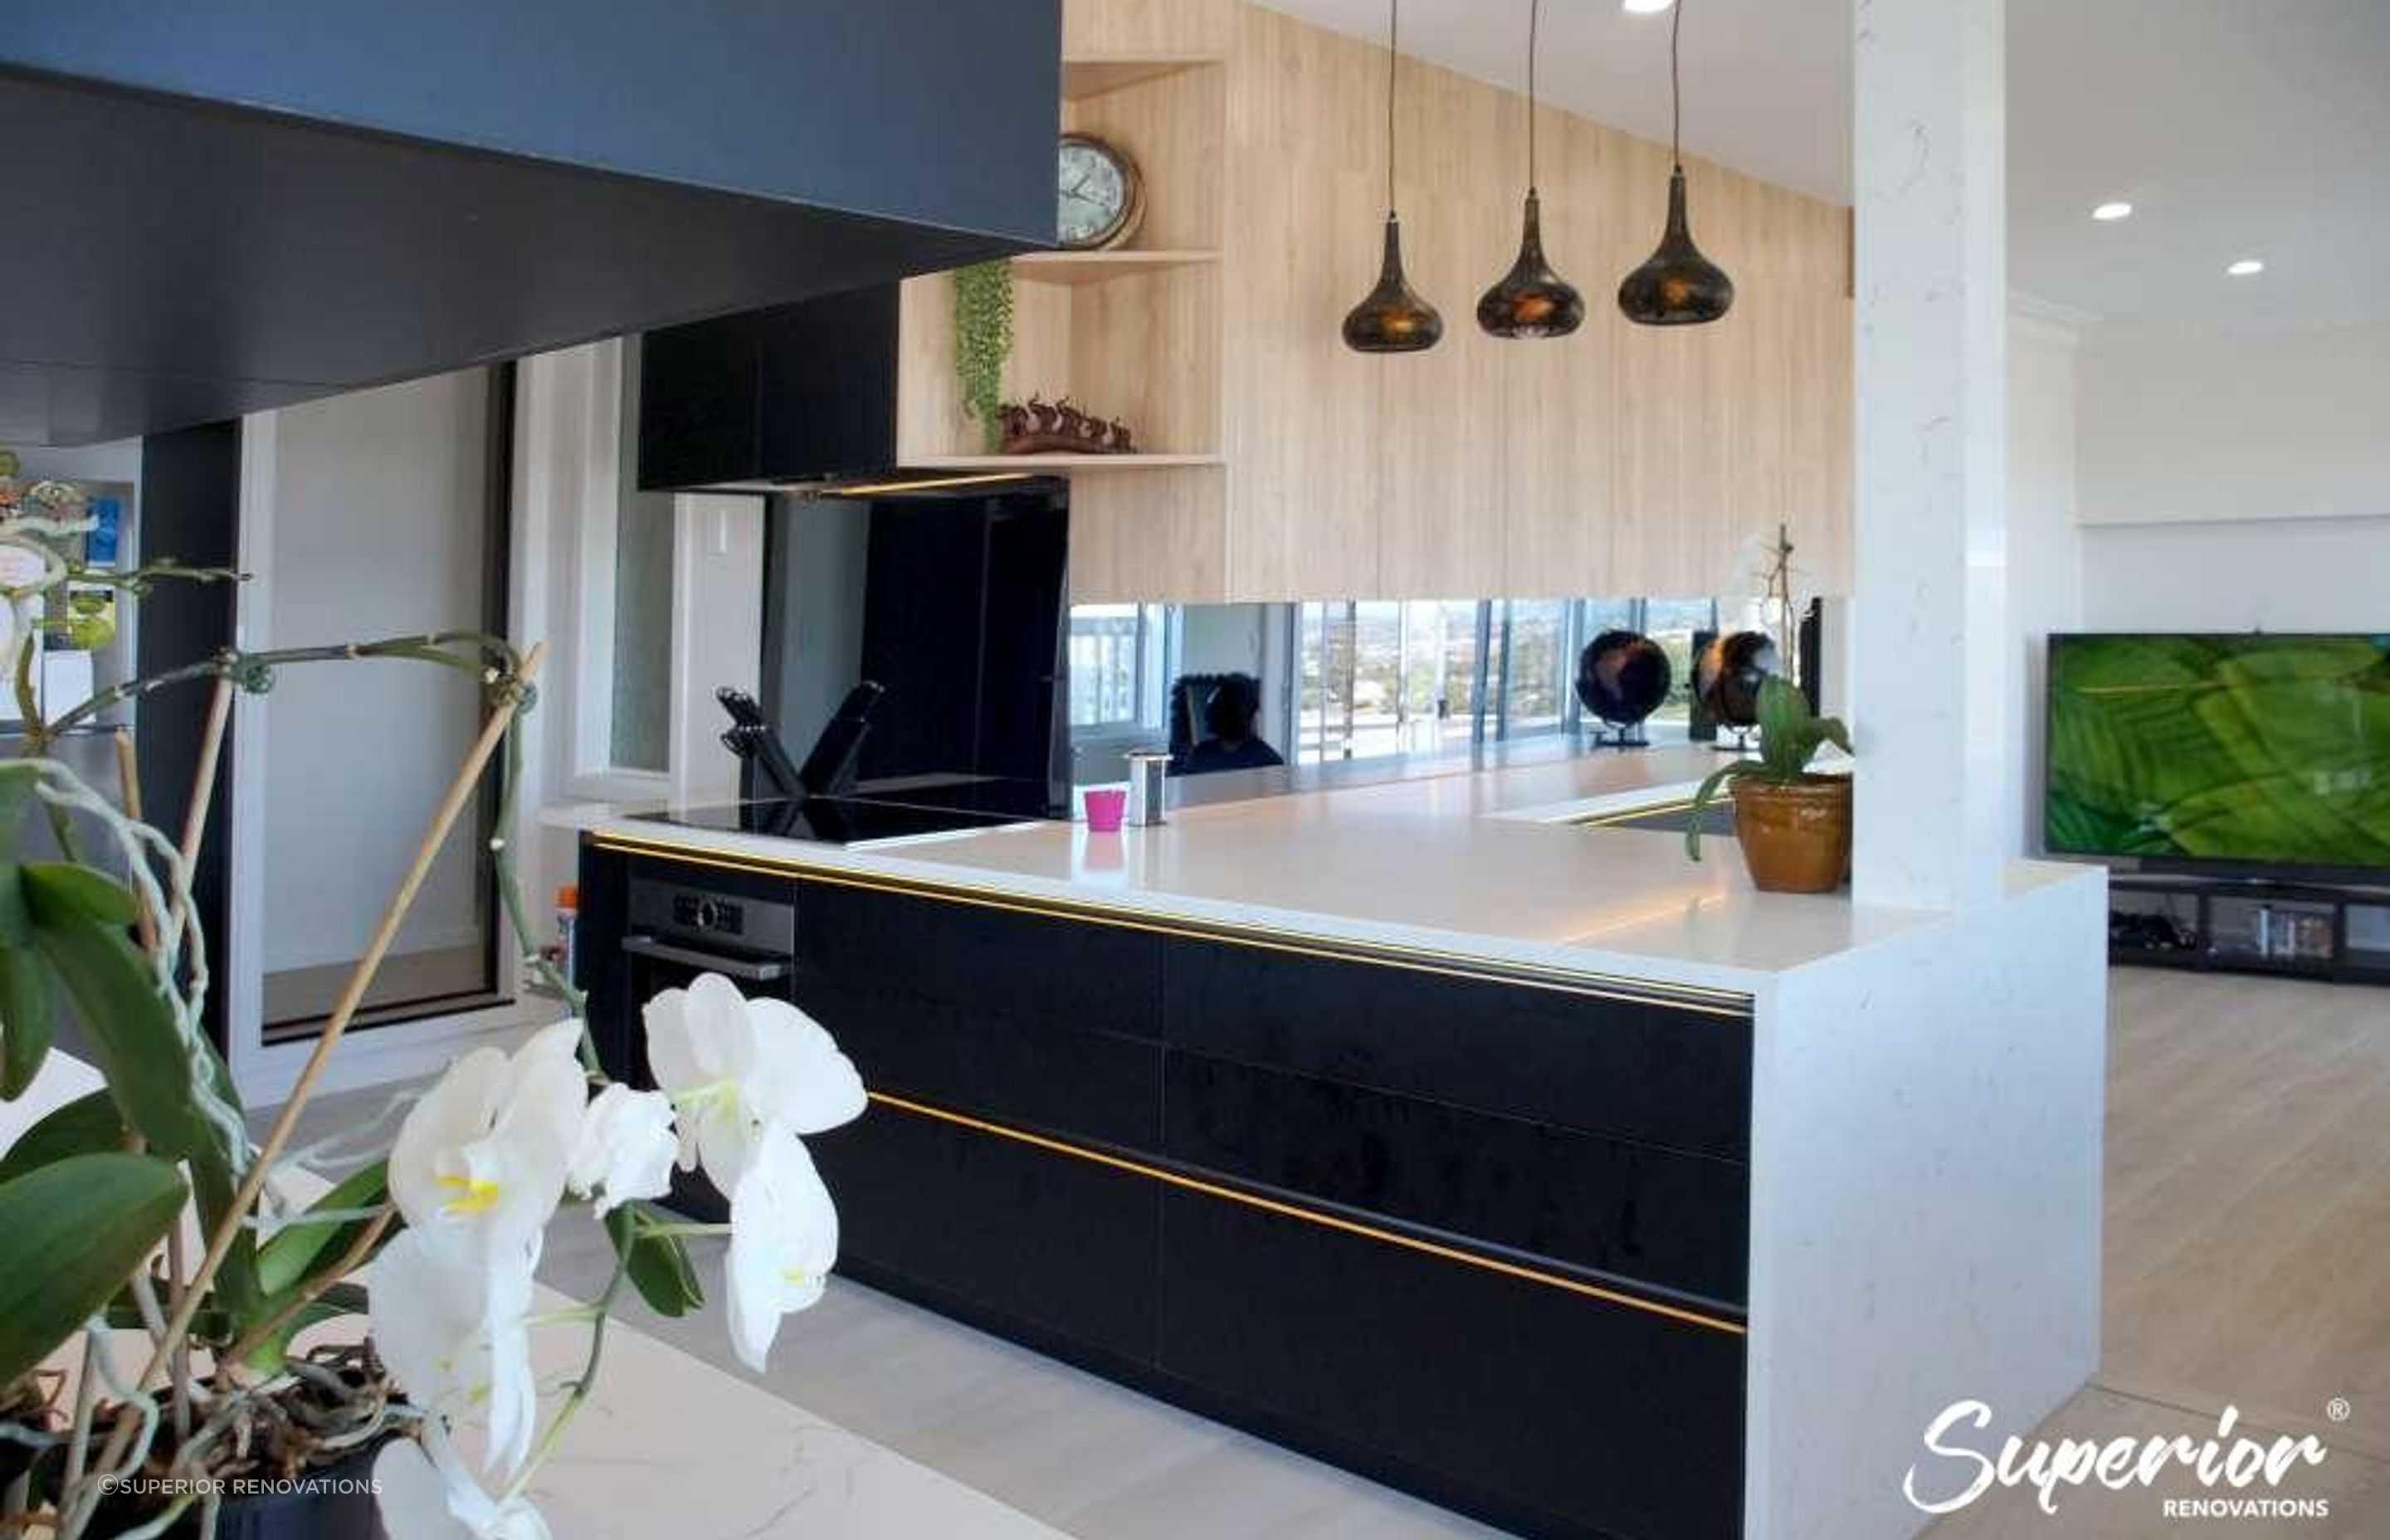 Open plan kitchen, perfect for entertaining and being sociable while cooking